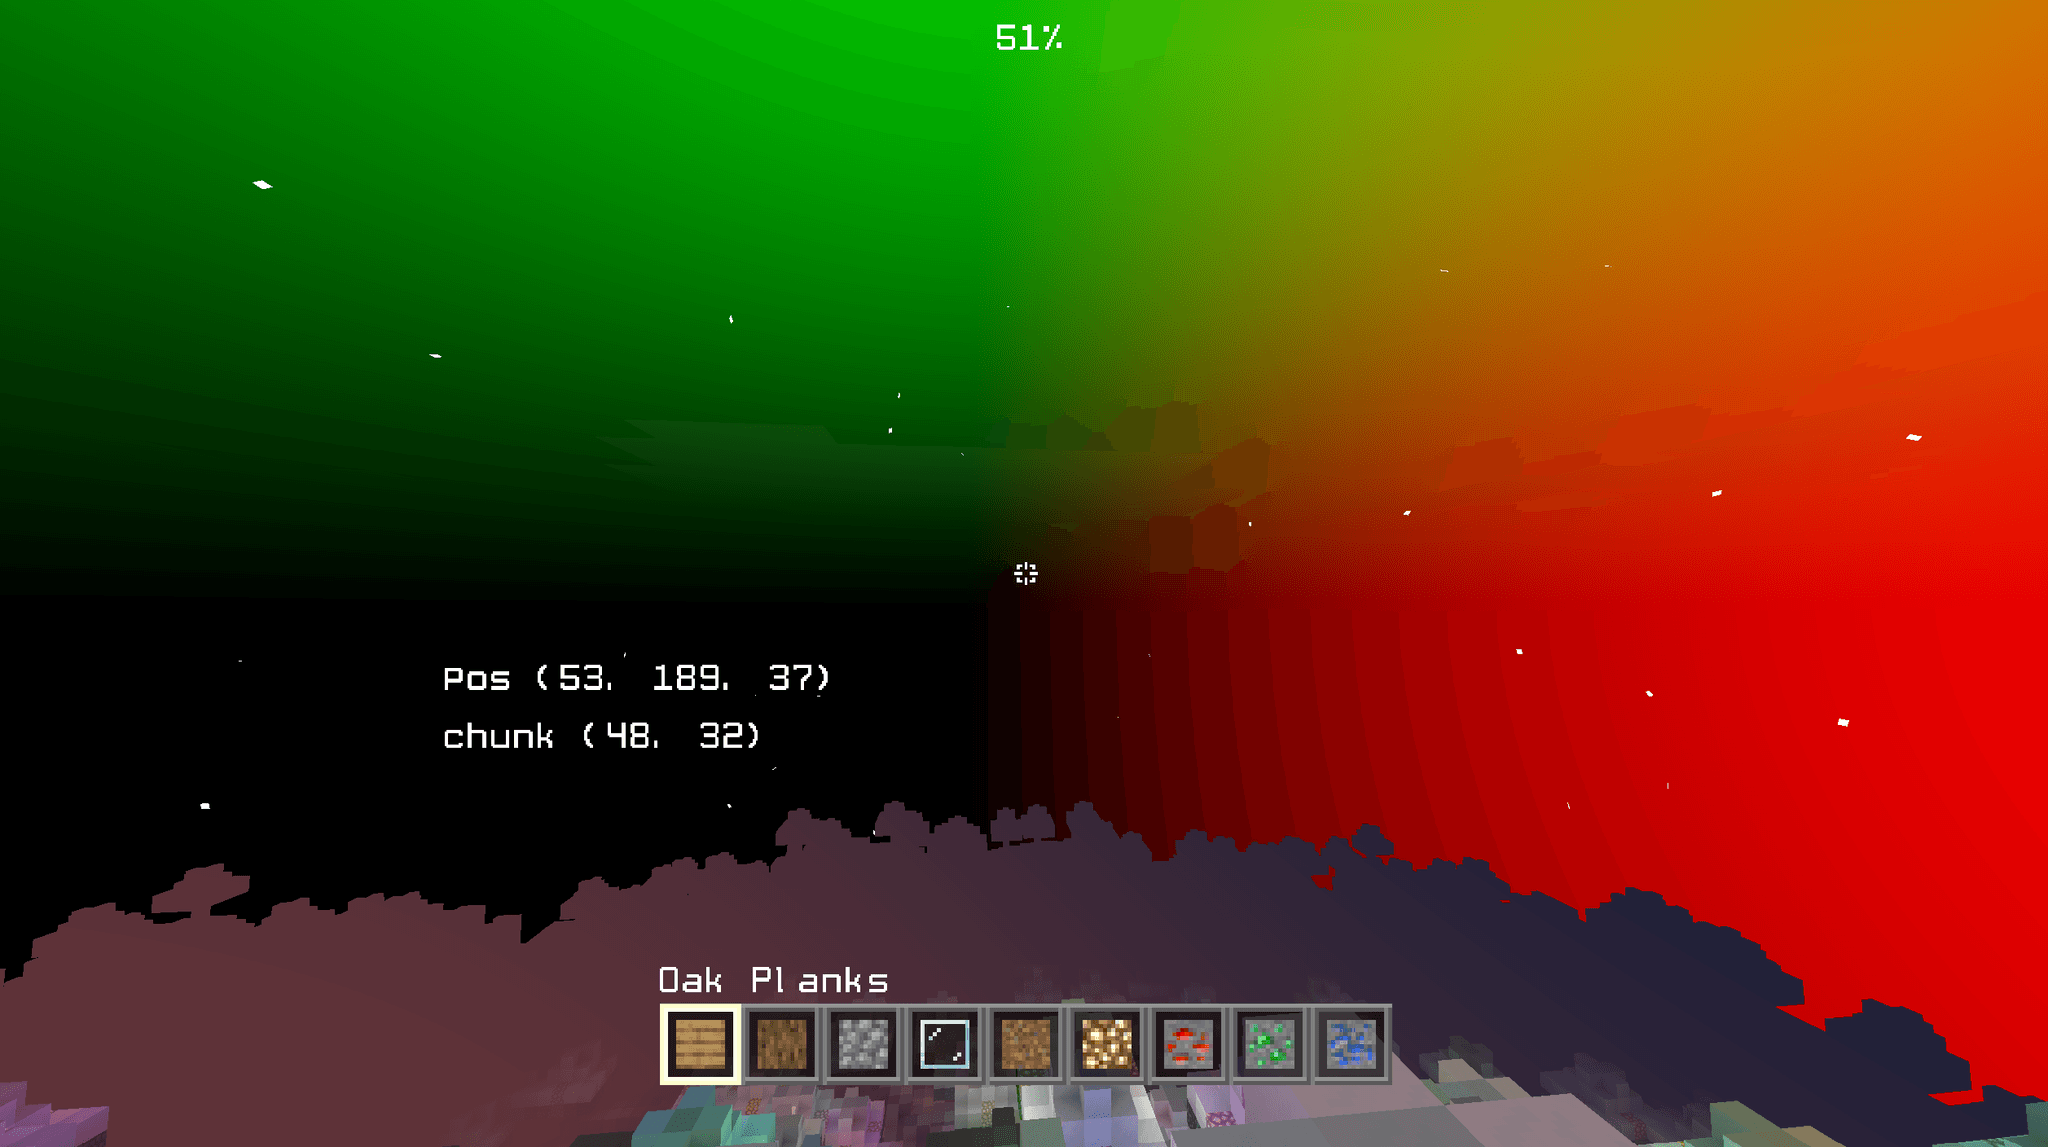 The sky is split into green, red, and black depending on the direction of the ray.